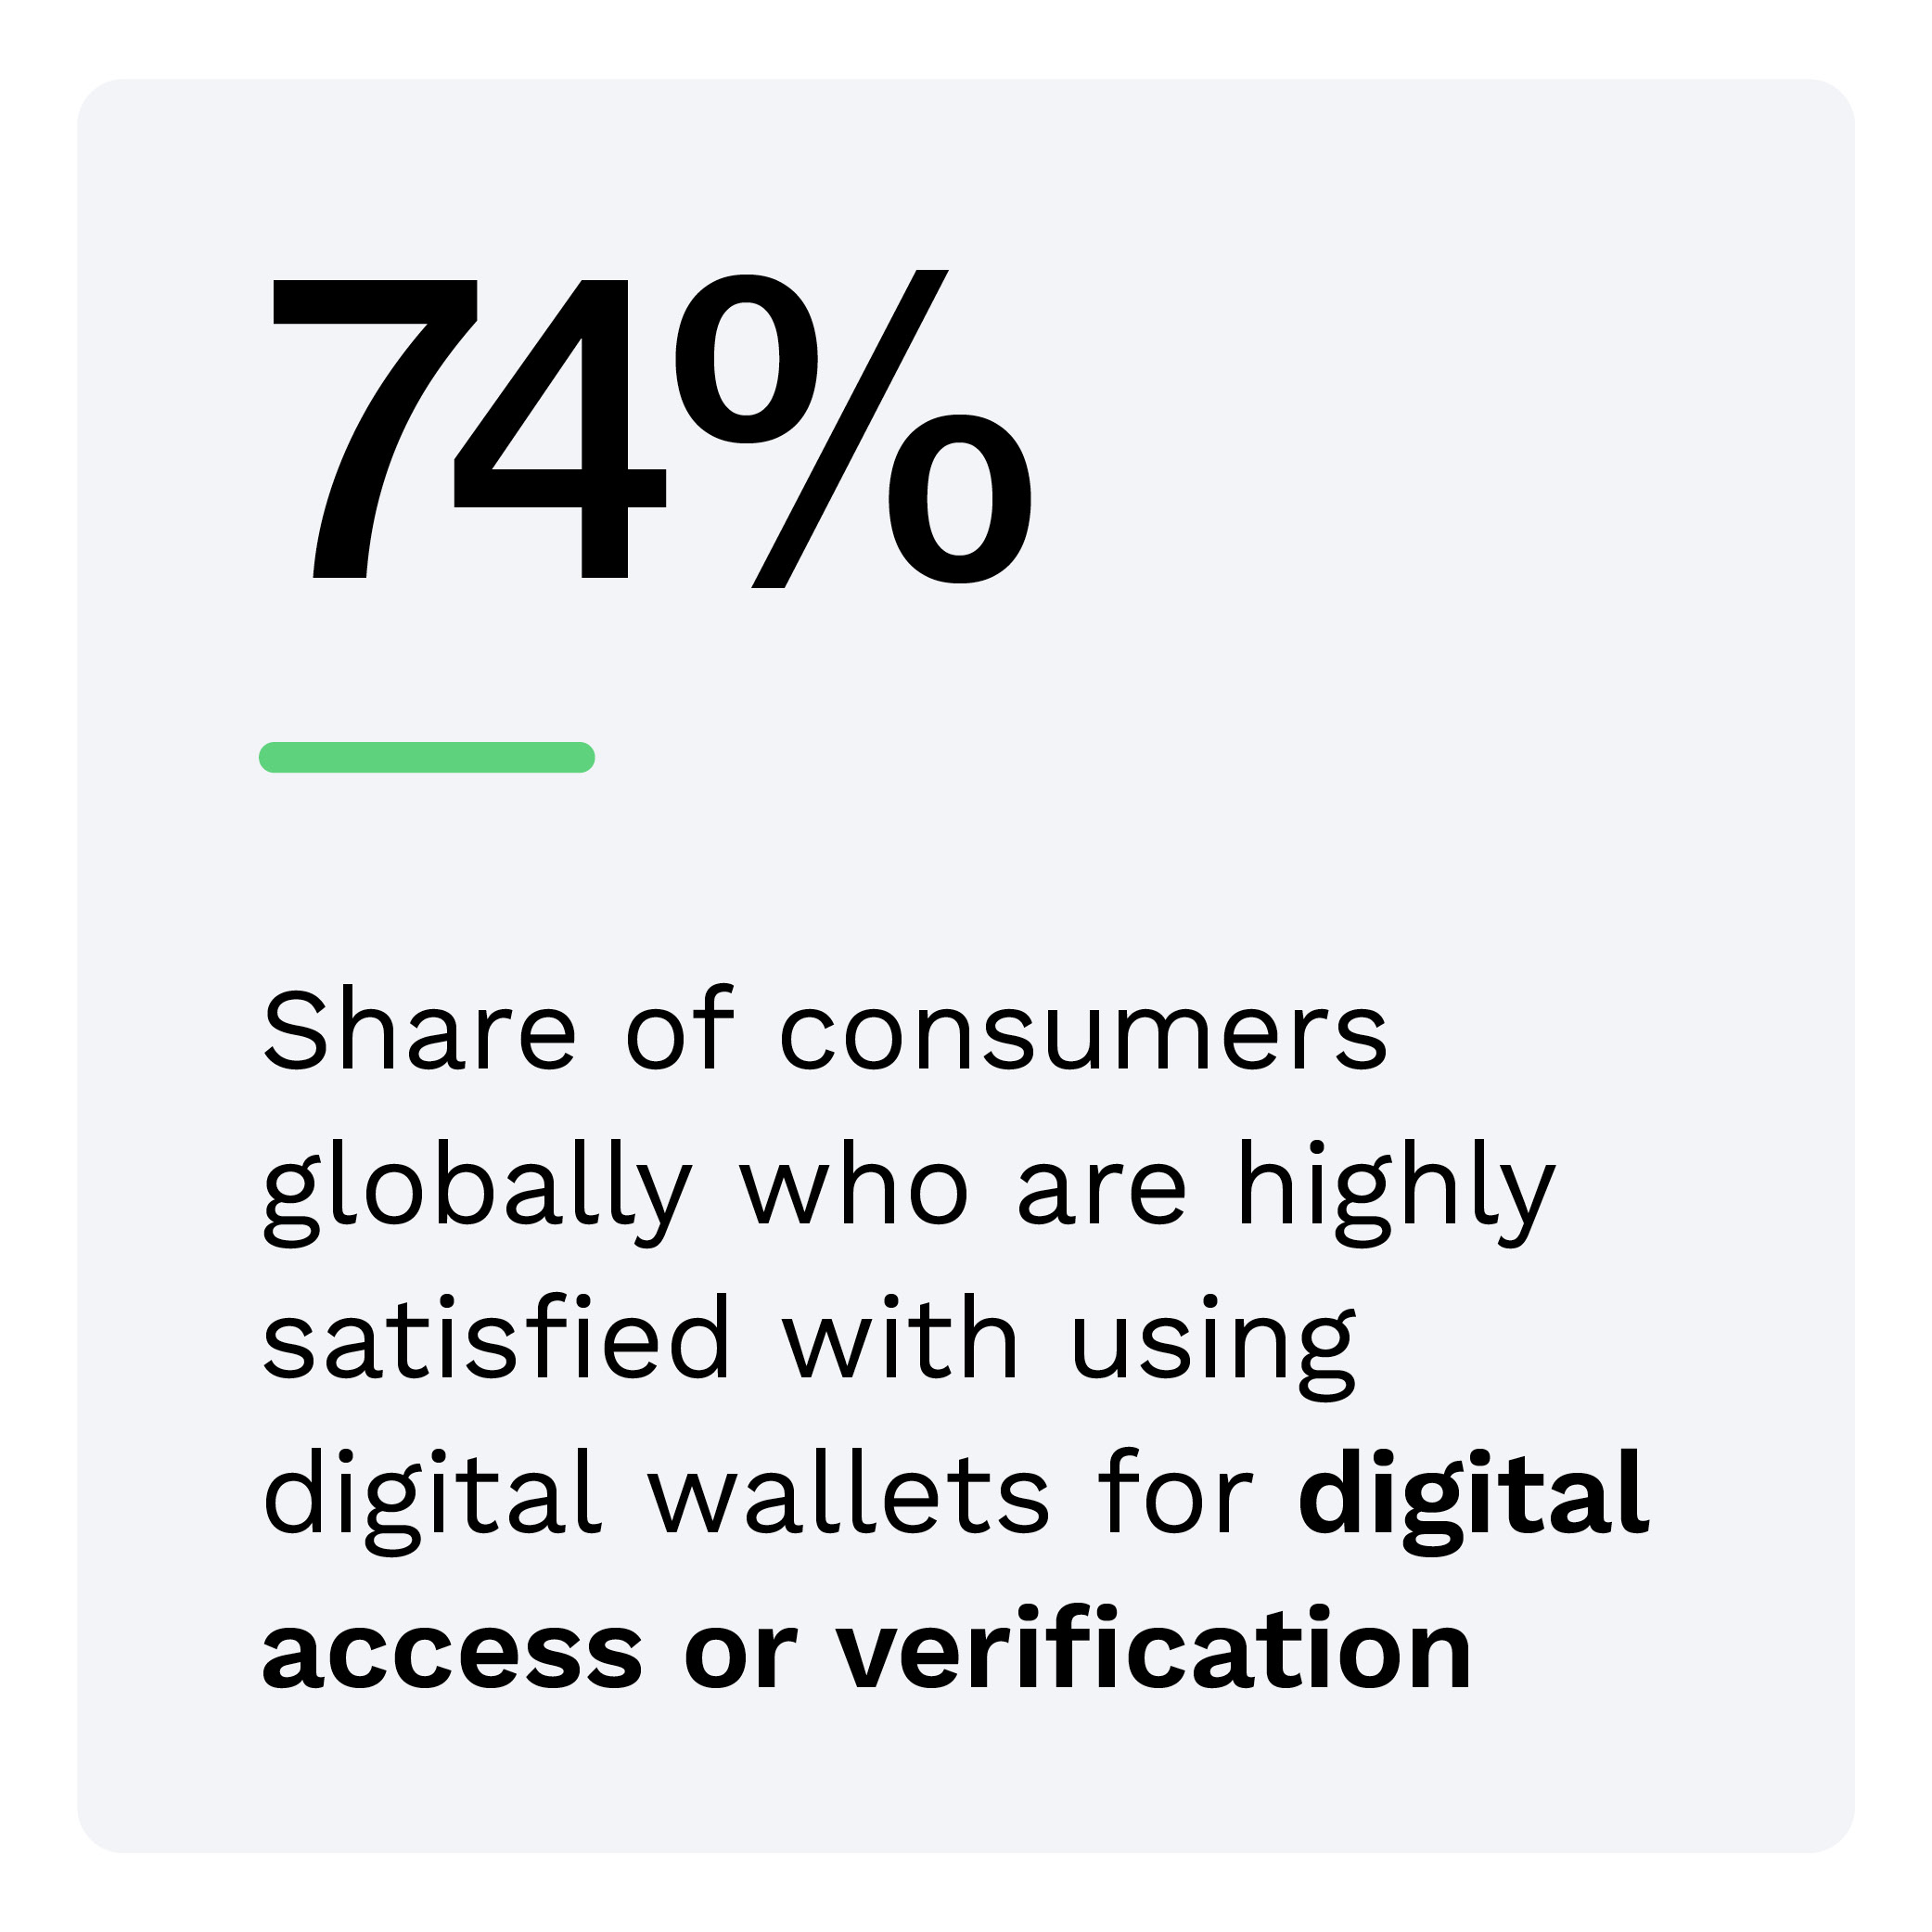 74%: Share of consumers globally who are highly satisfied with using digital wallets for digital access or verification